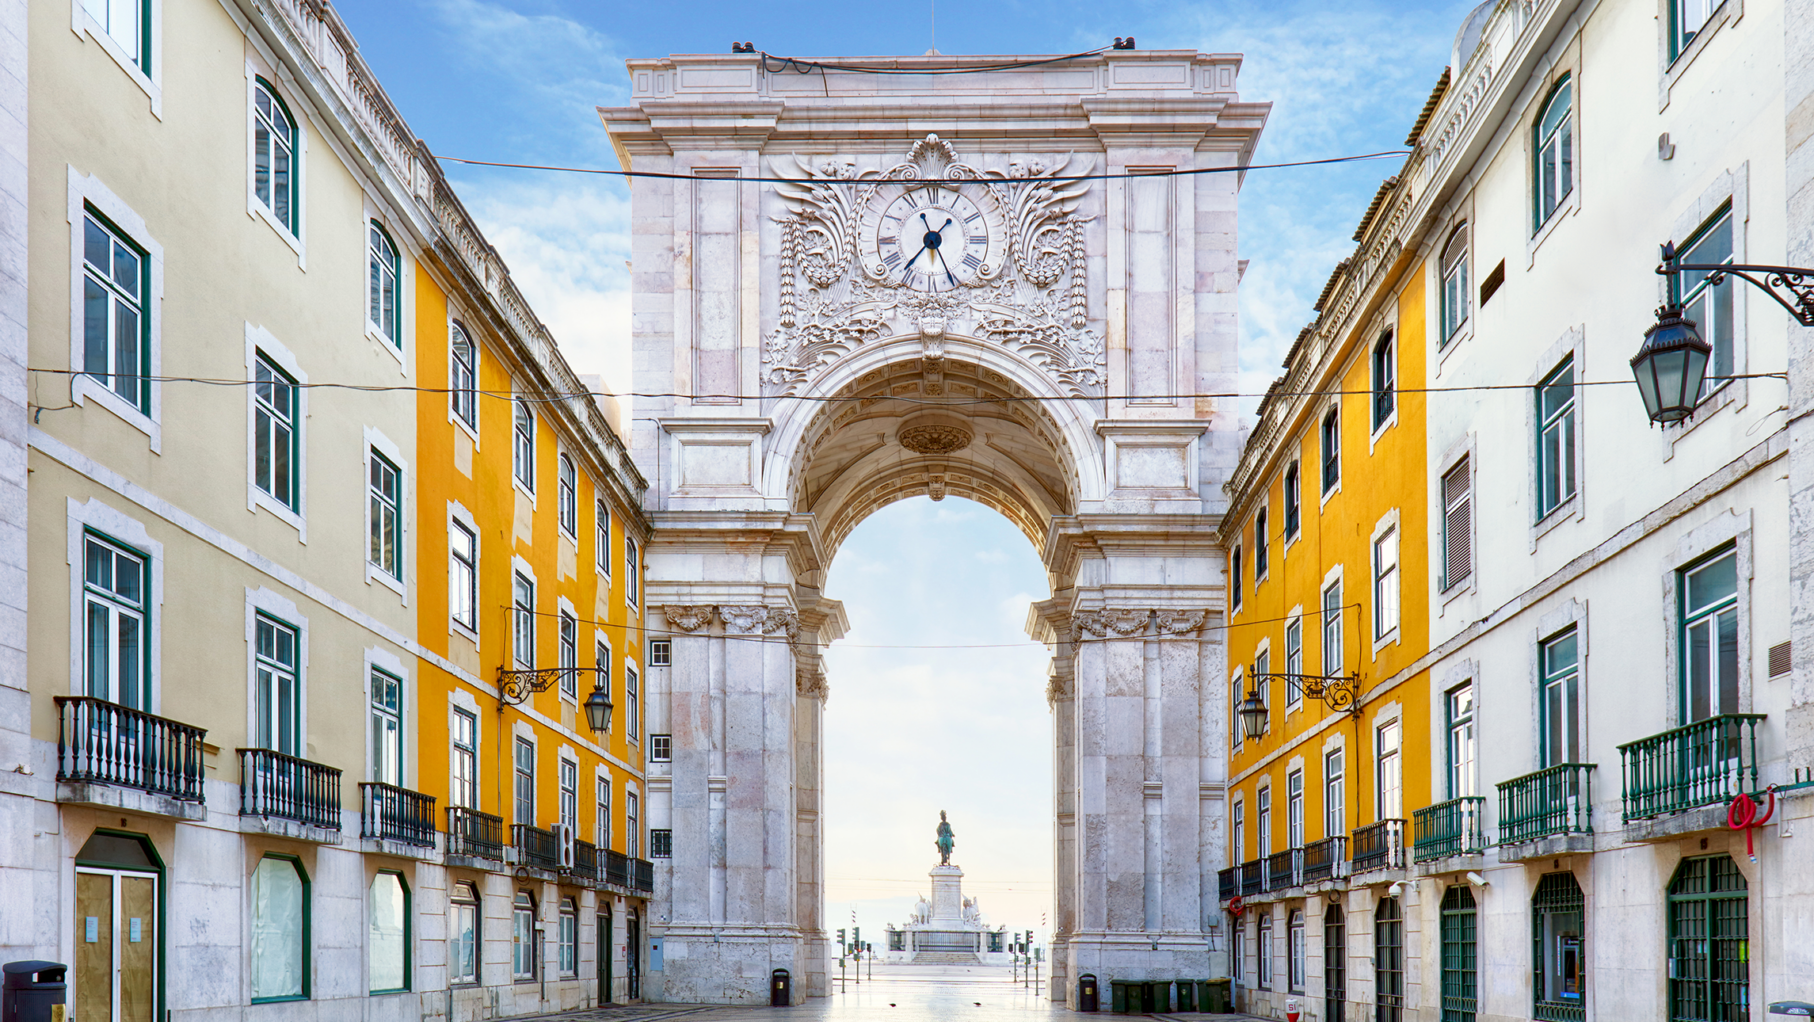 The historic archway in Lisbon